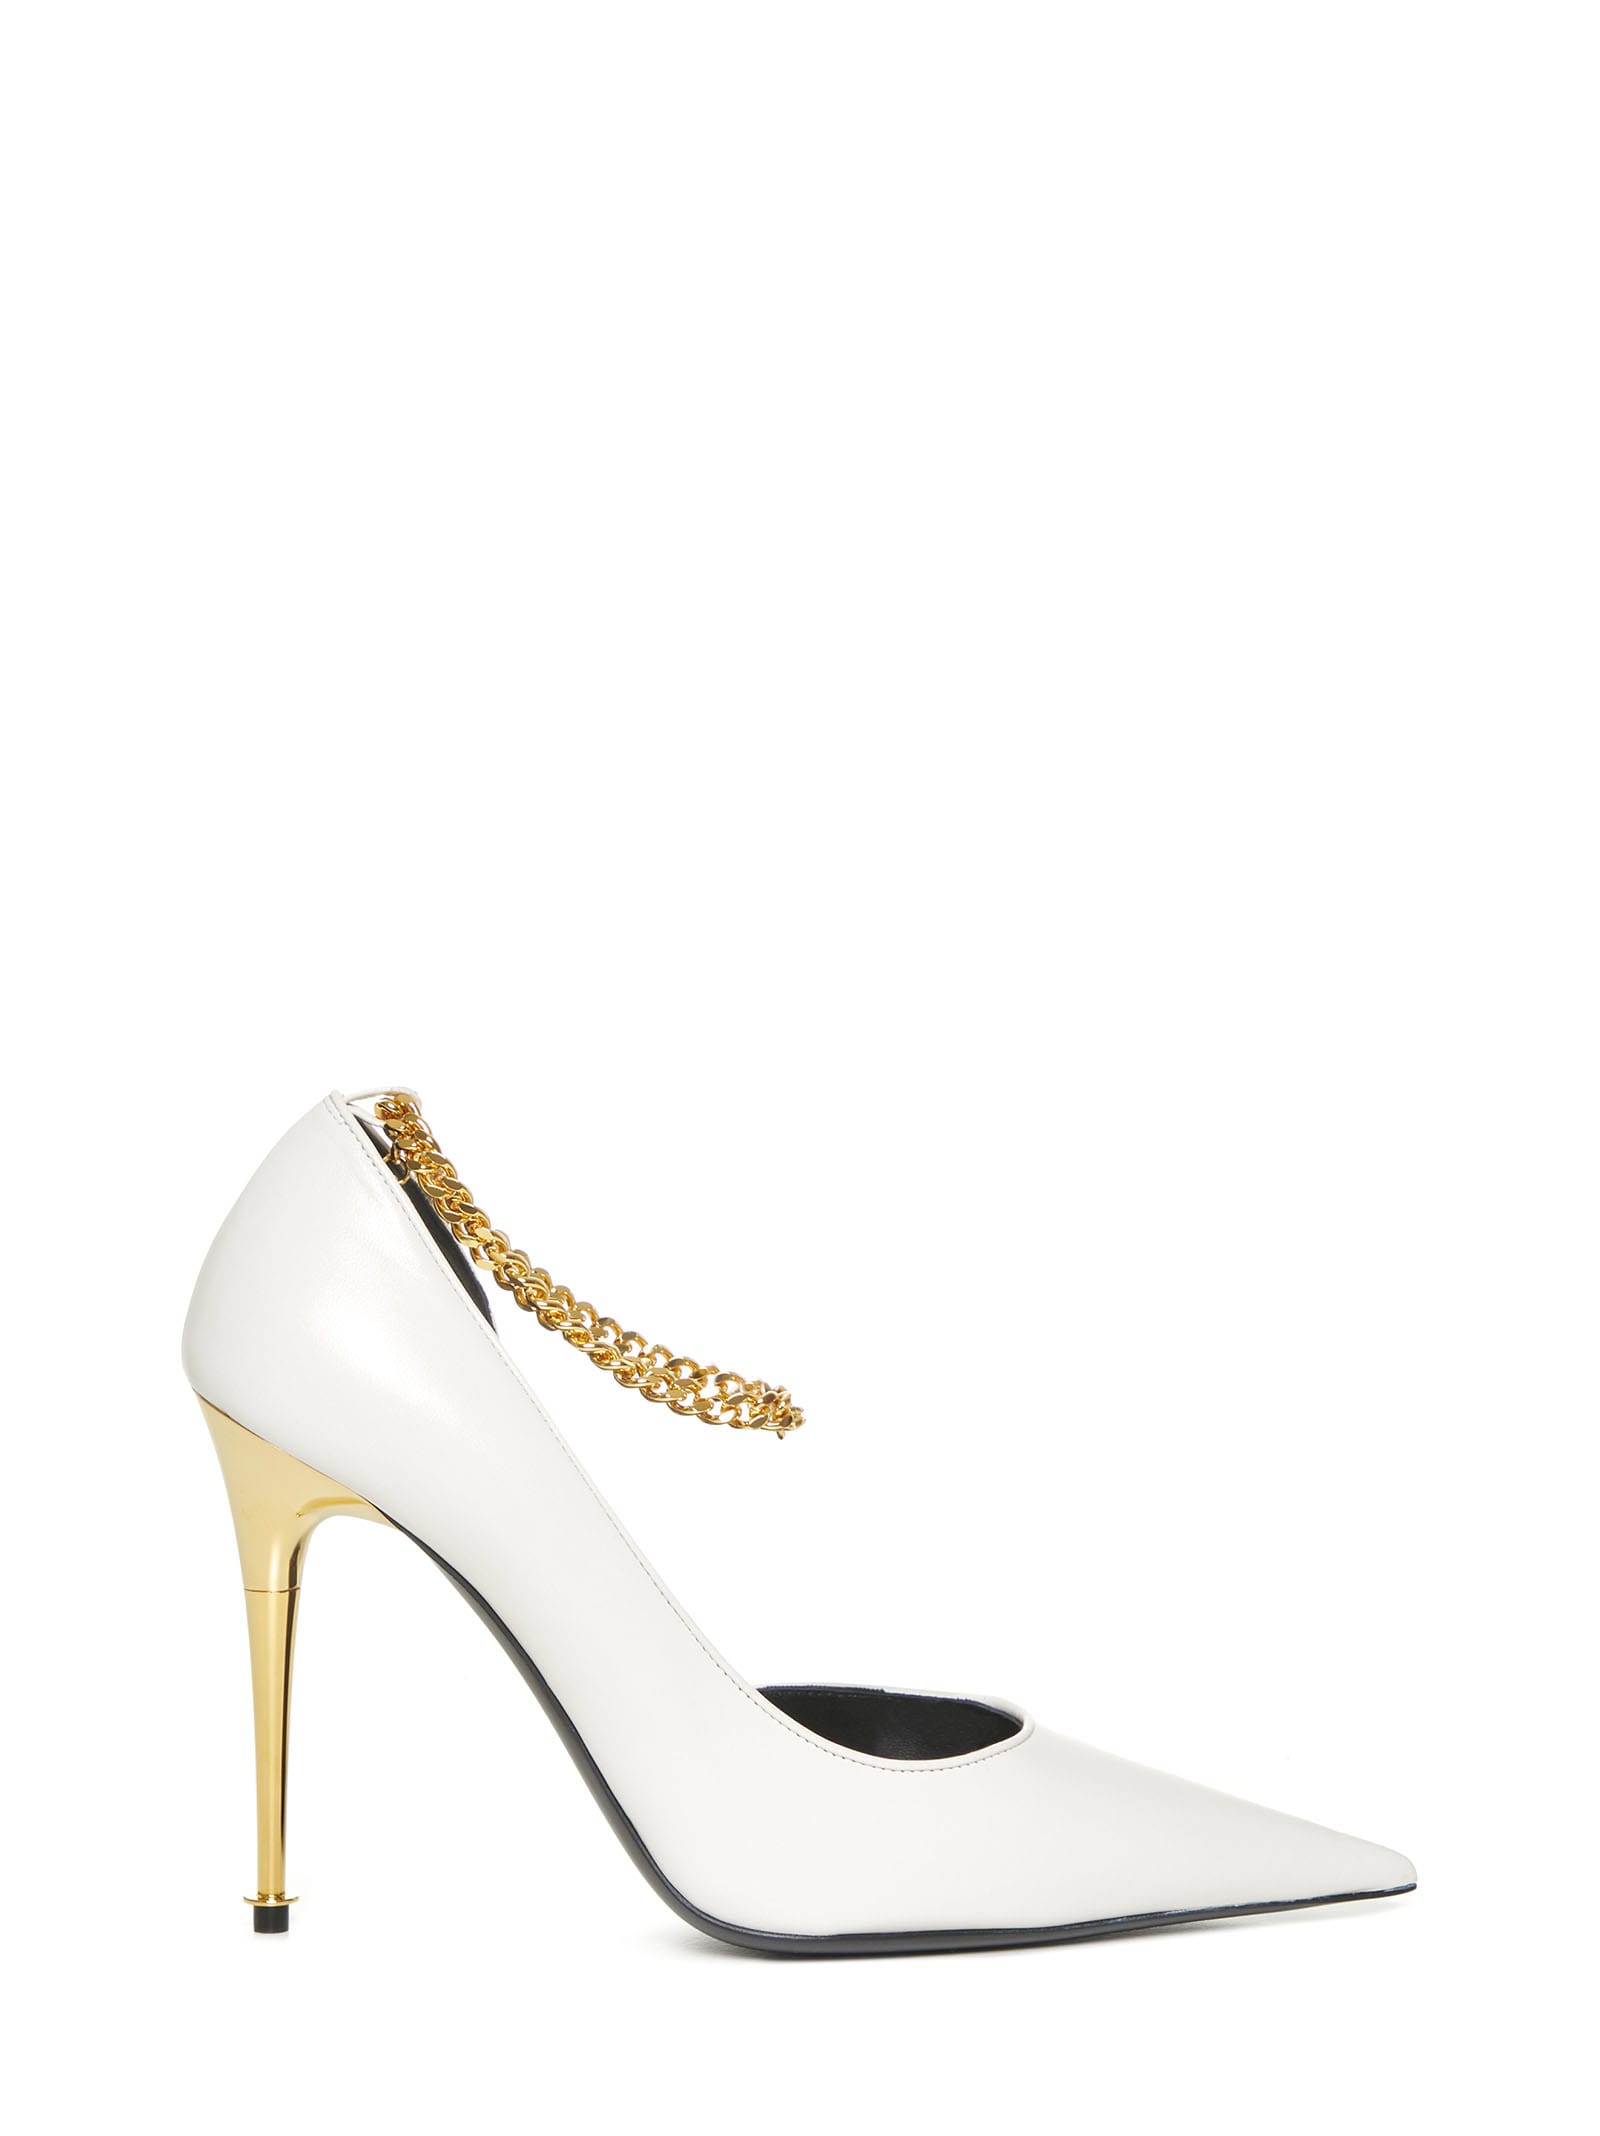 Tom Ford Pumps In White